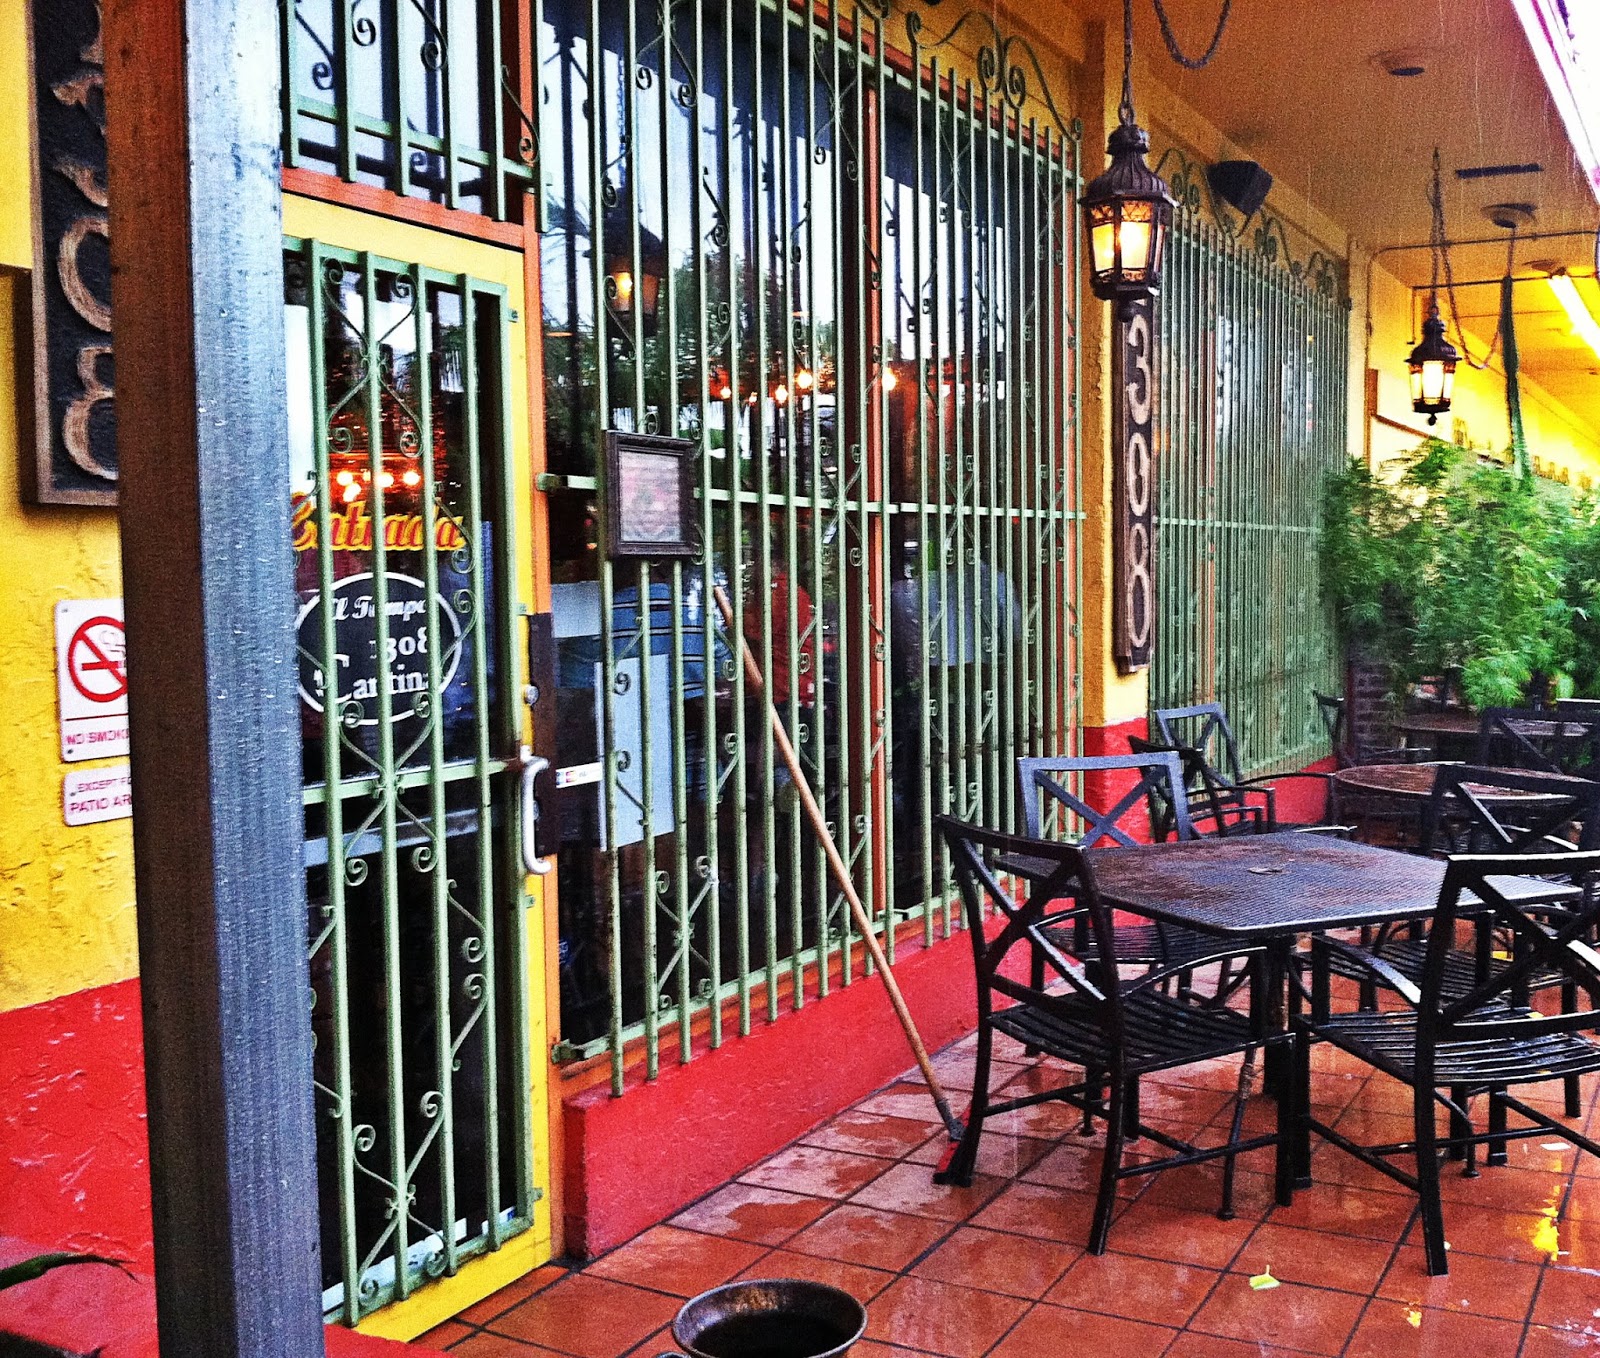 The good times will continue to roll on at El Tiempo 1303 Cantina on Montrose.